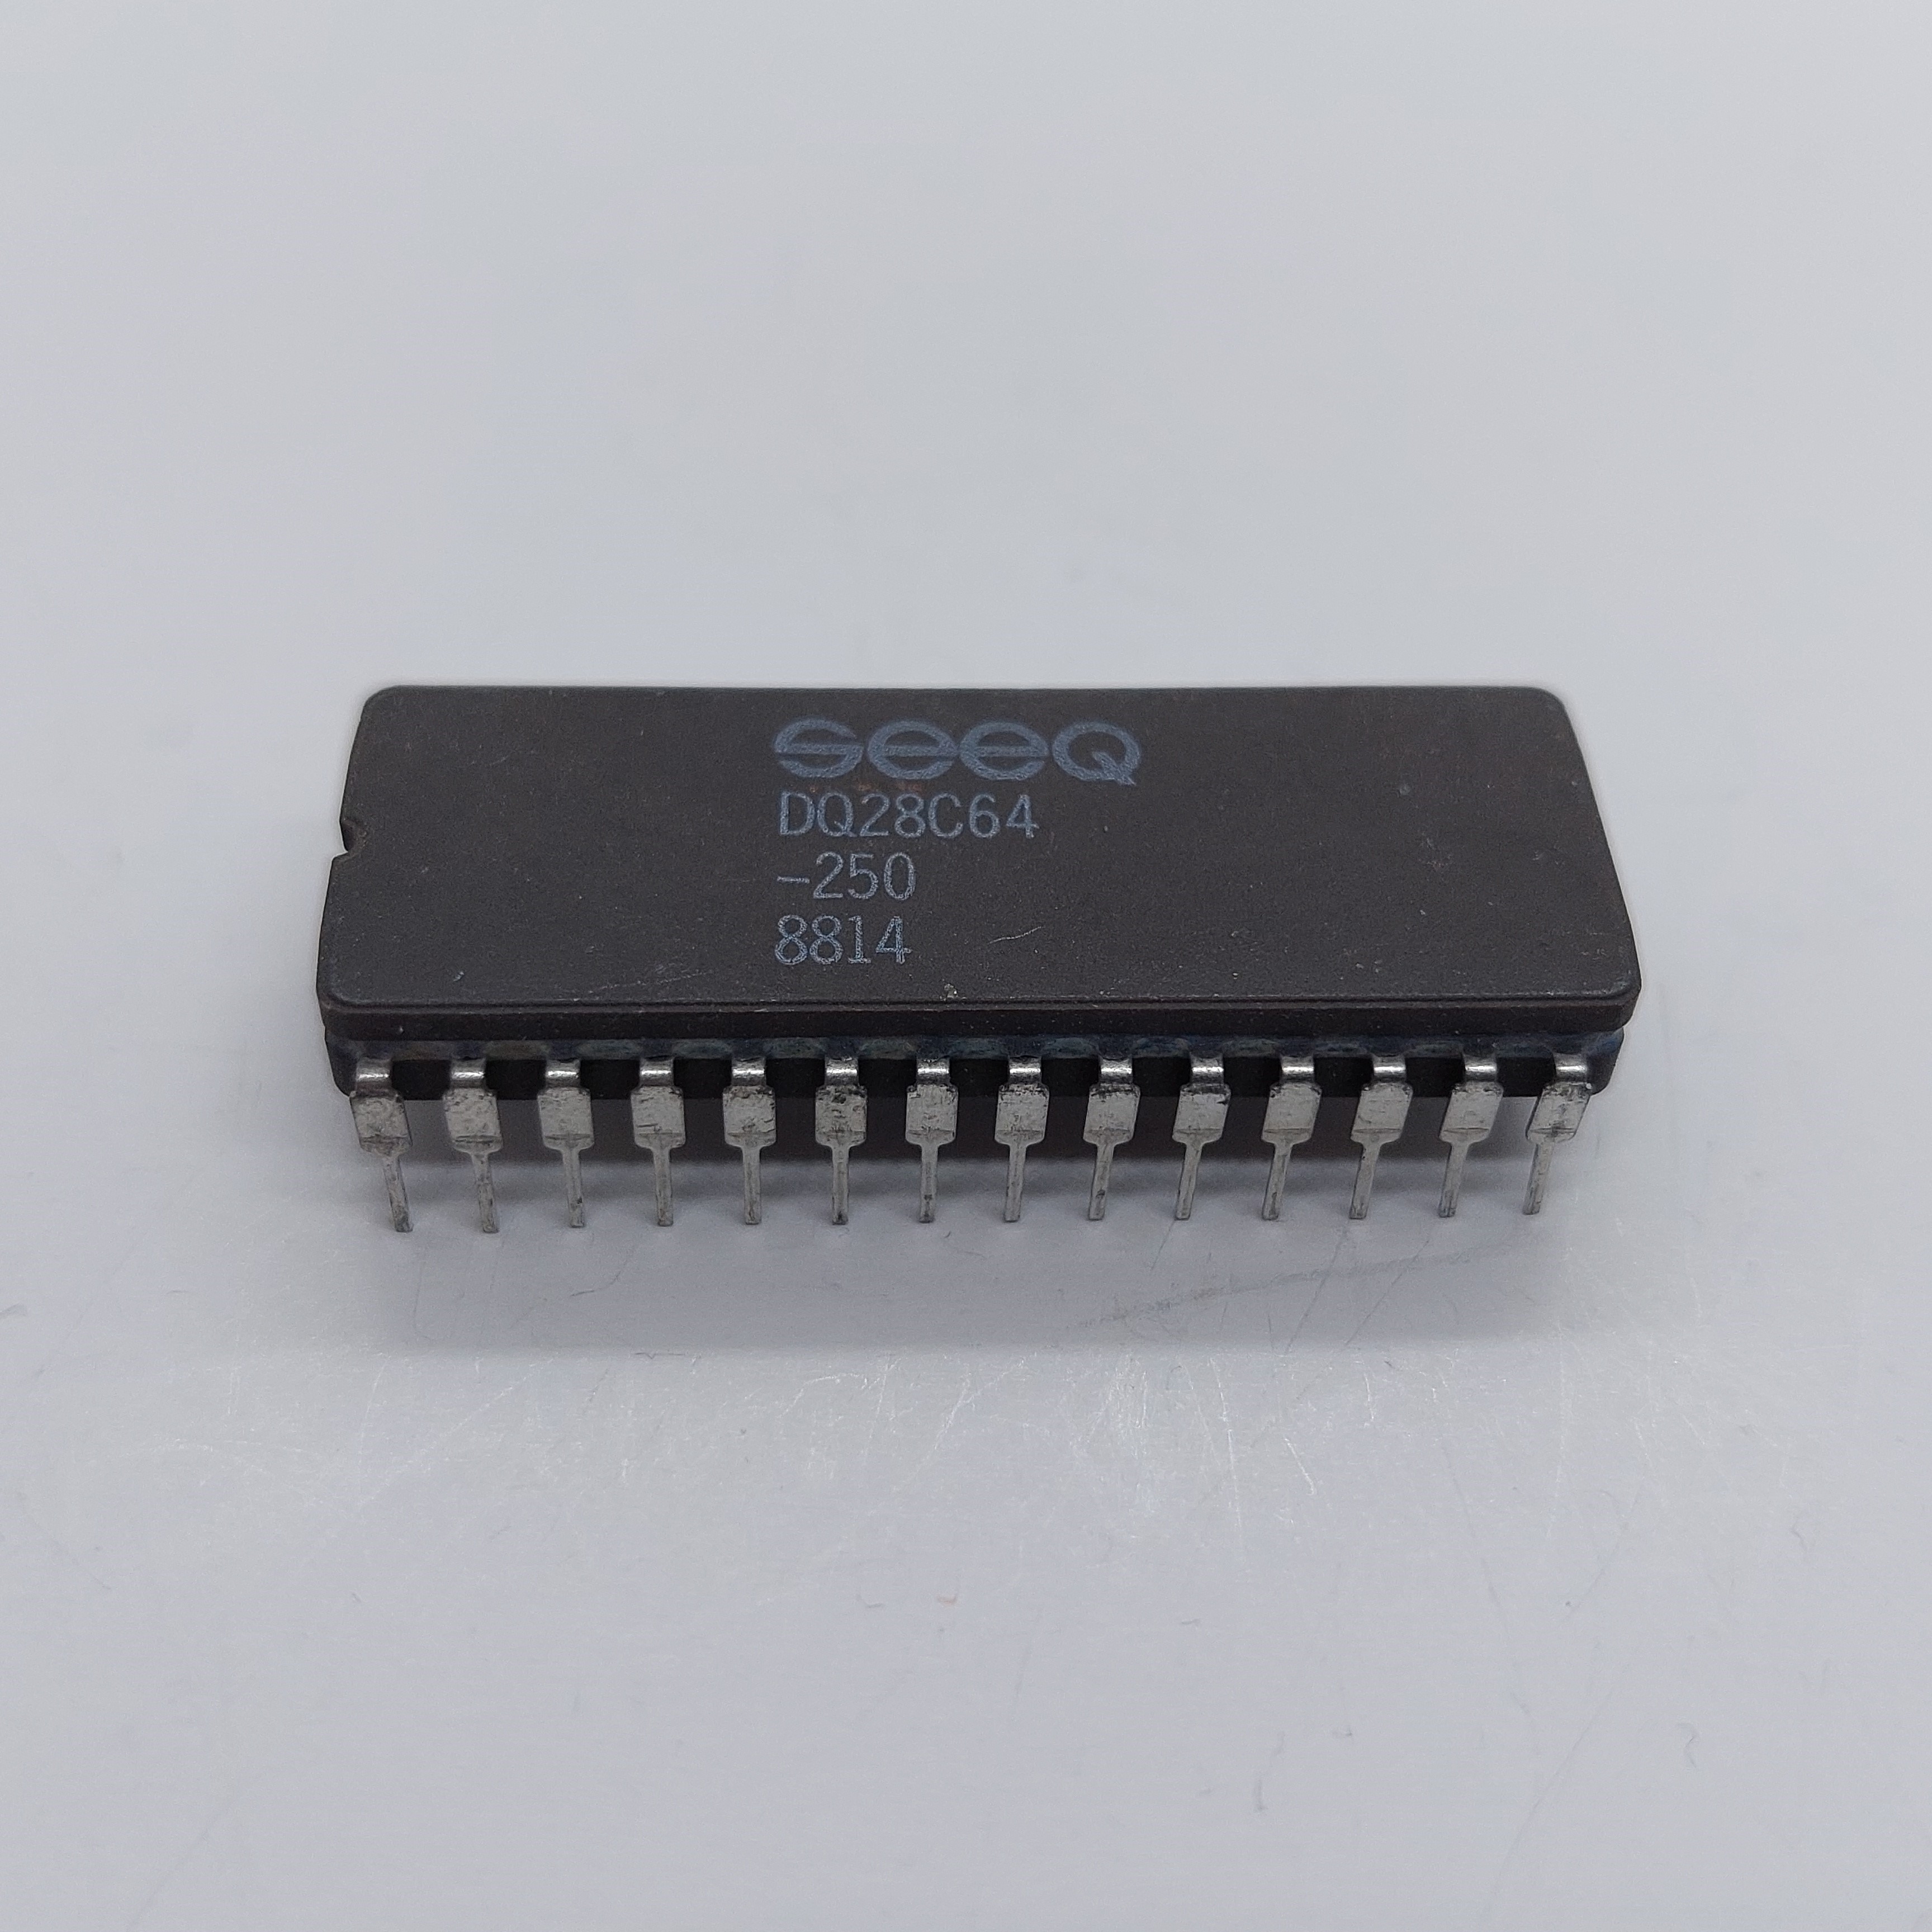 DQ28C64-250 SEEQ EPROM INTEGRATED CIRCUIT X1PC